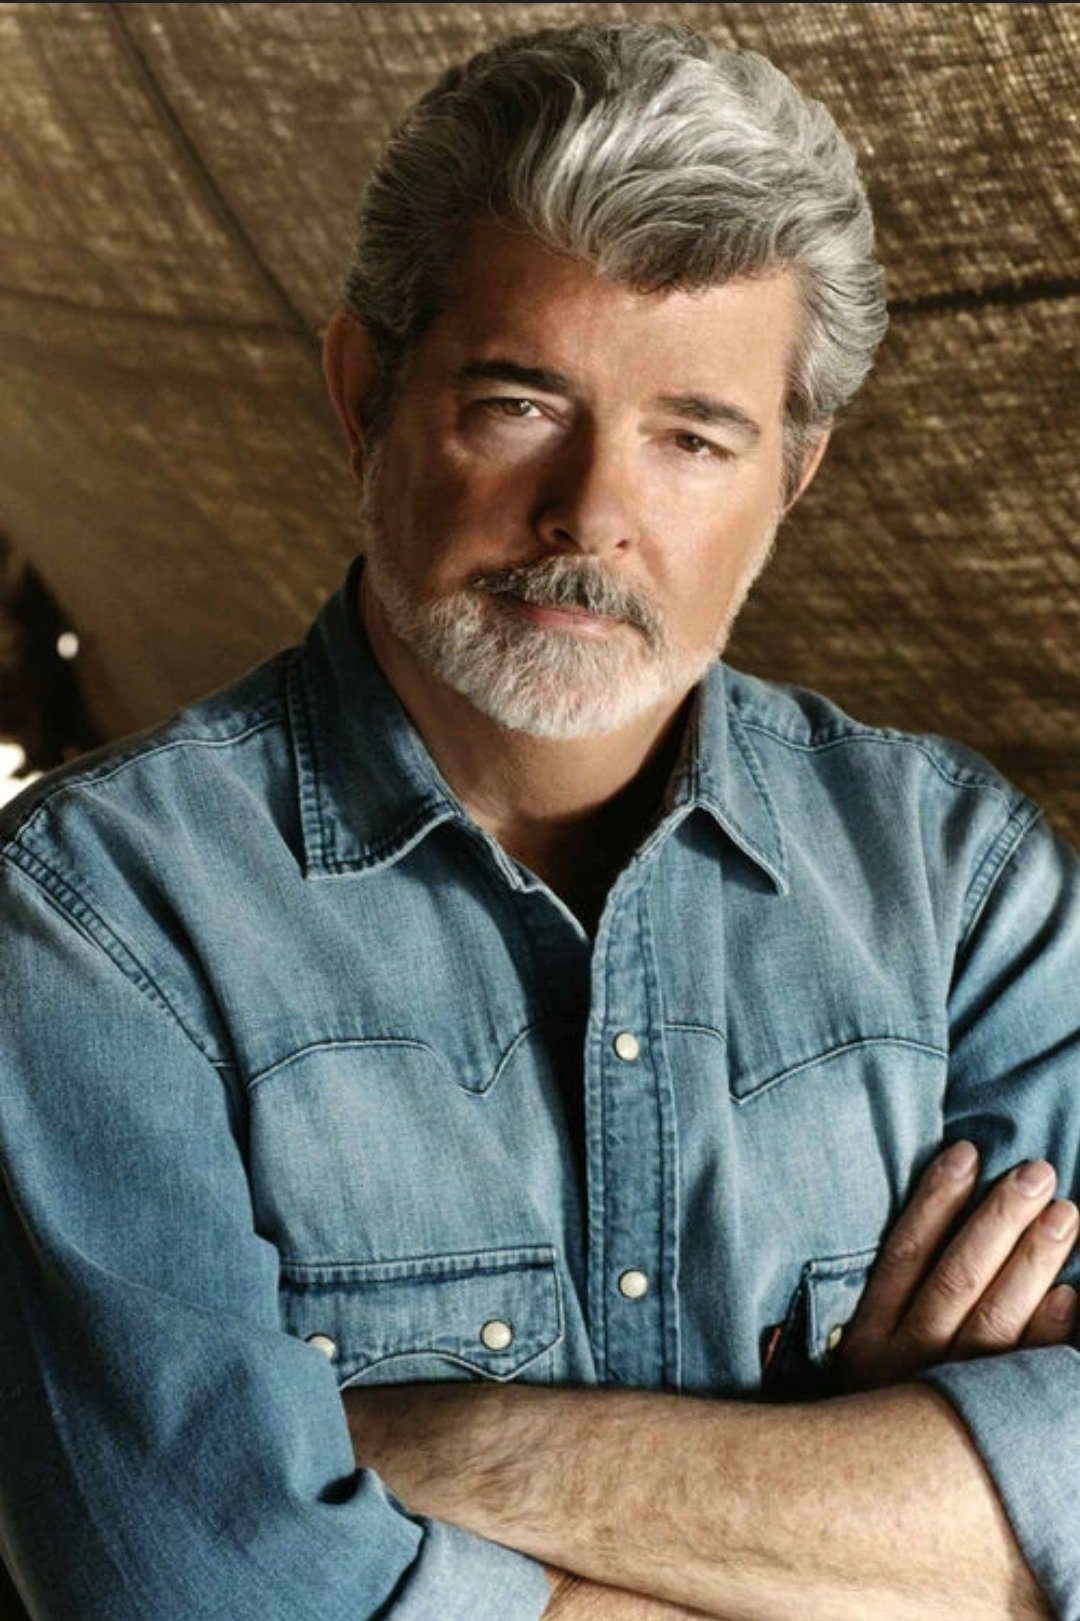 Happy birthday legendary George Lucas Skywalker, the Creator of the best film saga, and may the force be with you 